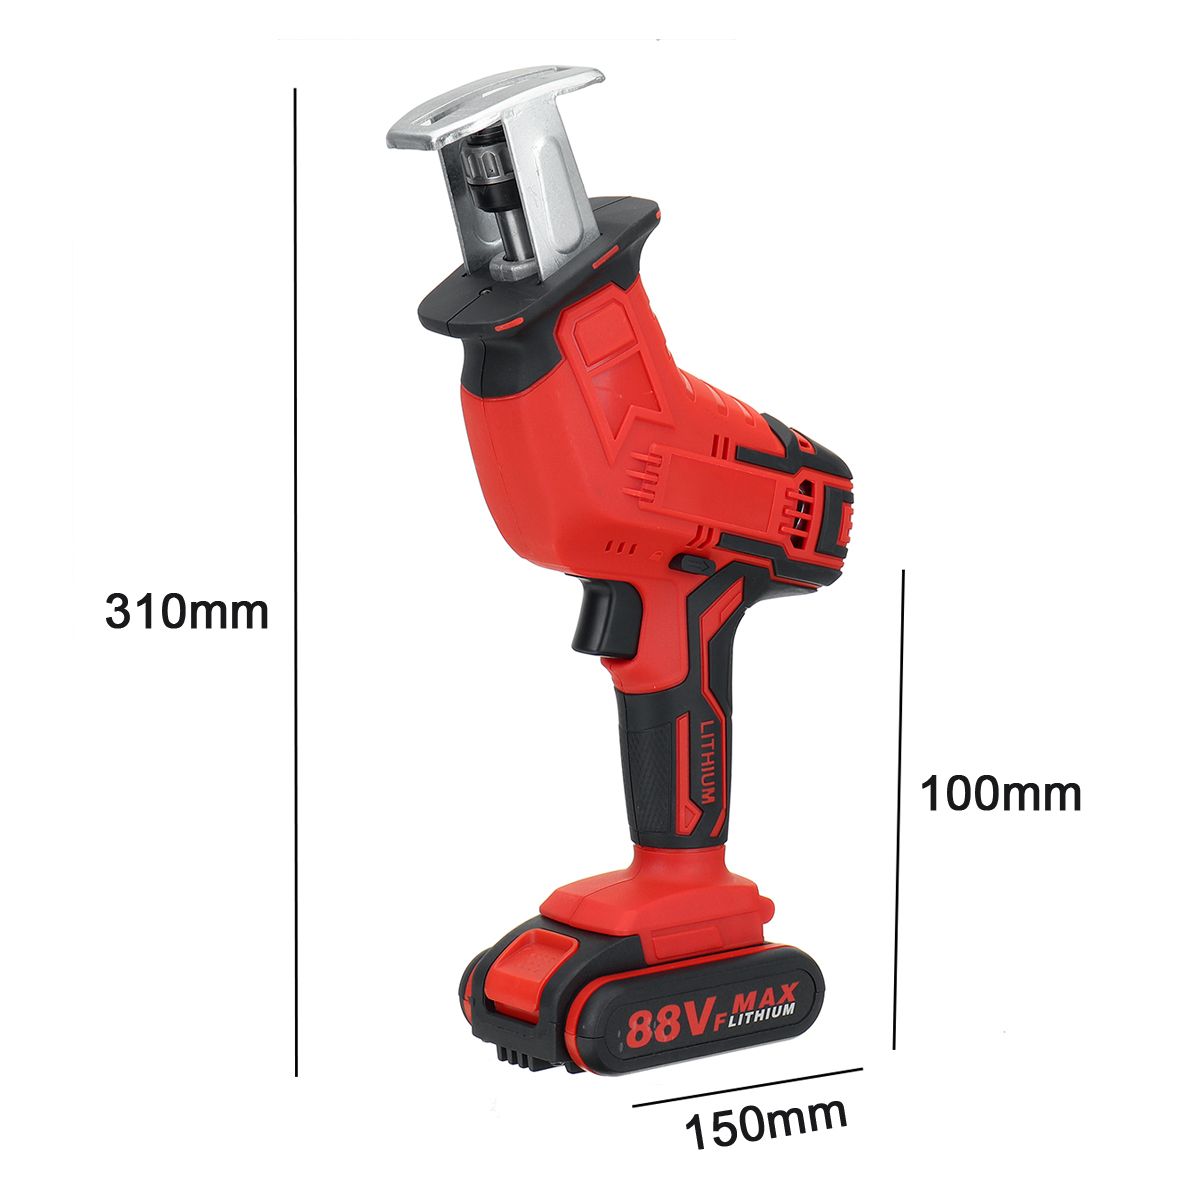 88VF-Electric-Reciprocating-Saws-Outdoor-Woodworking-Cordless-Portable-Saw-With-Blade-1721109